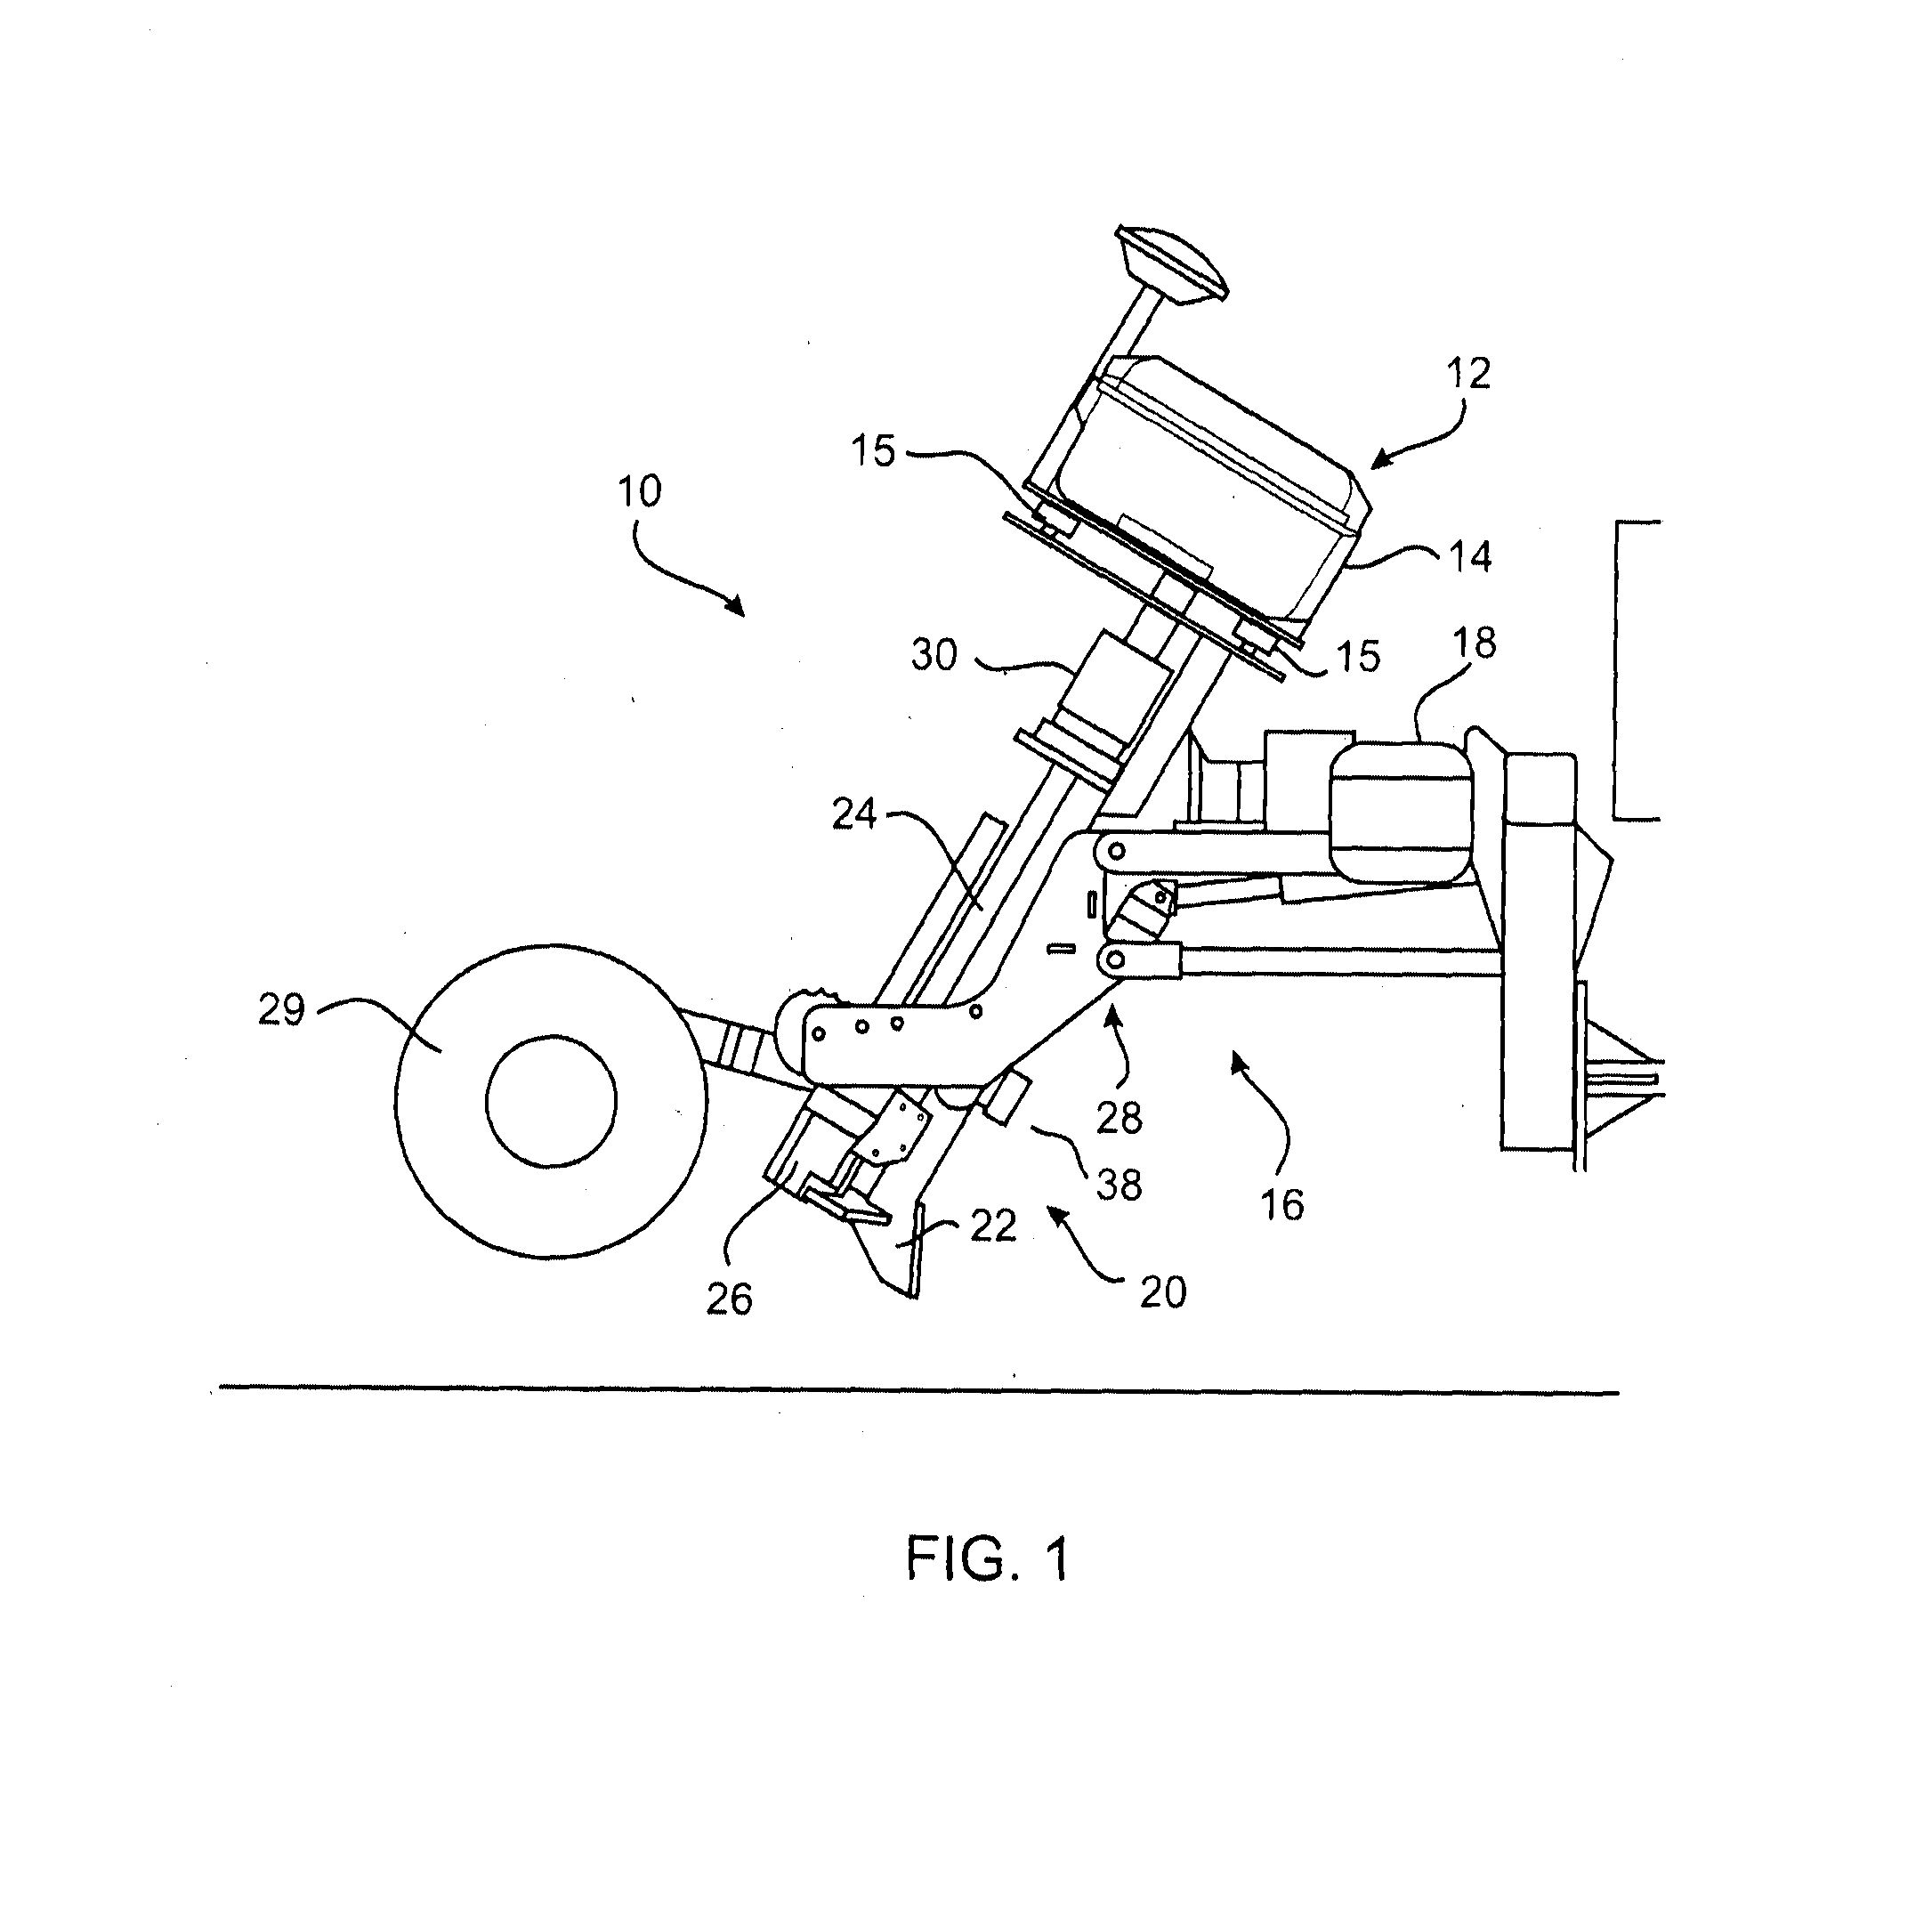 Method, system and apparatus for use in locating subsurface ore bodies